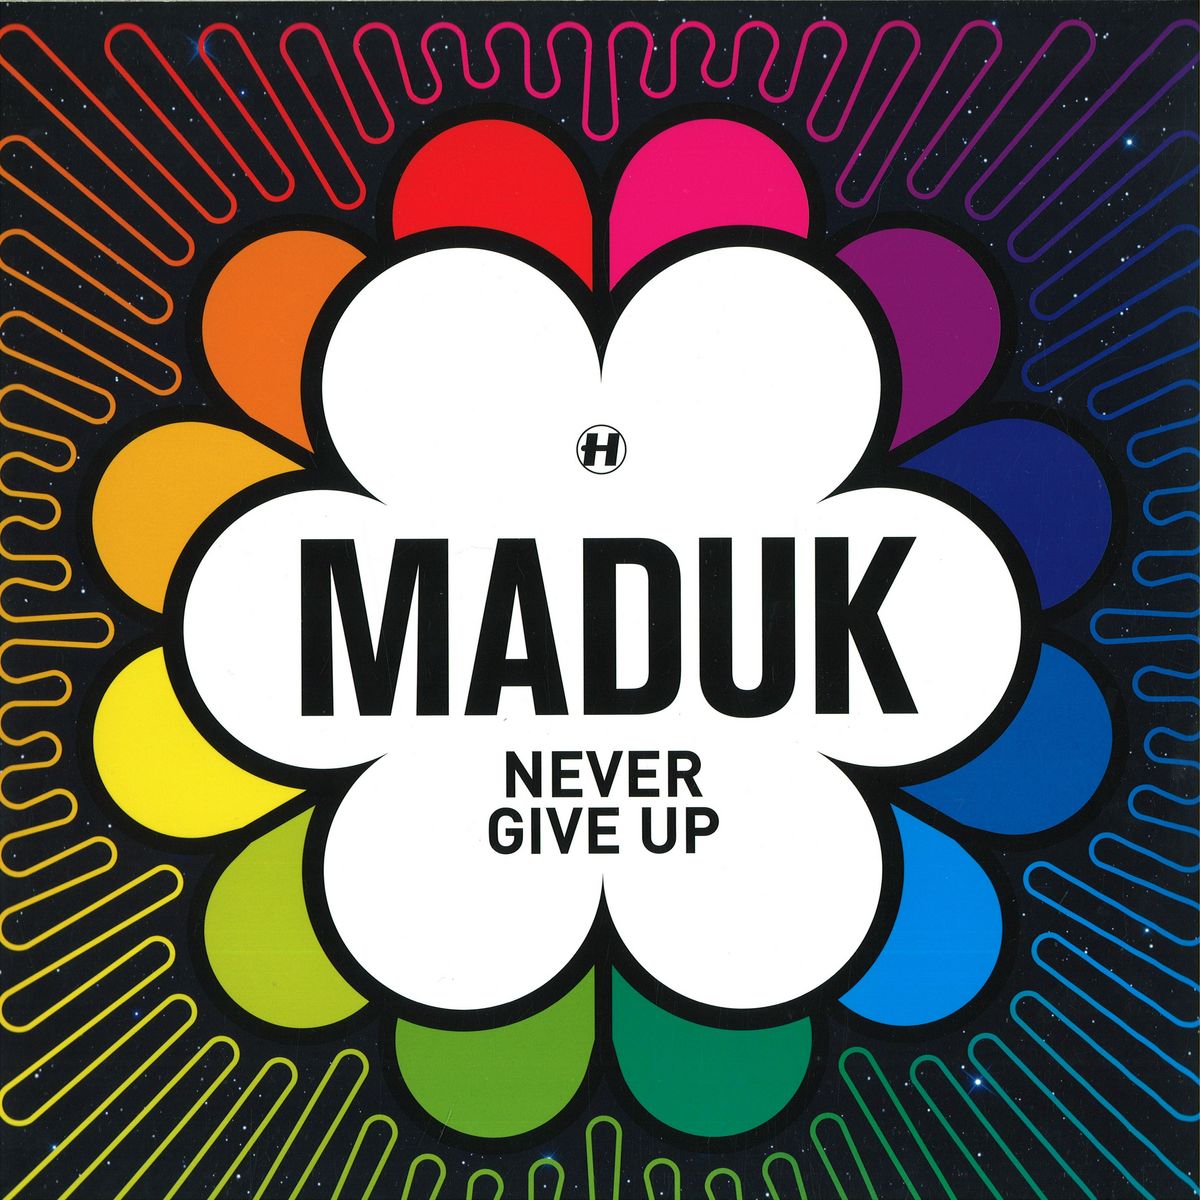 maduk- never give up